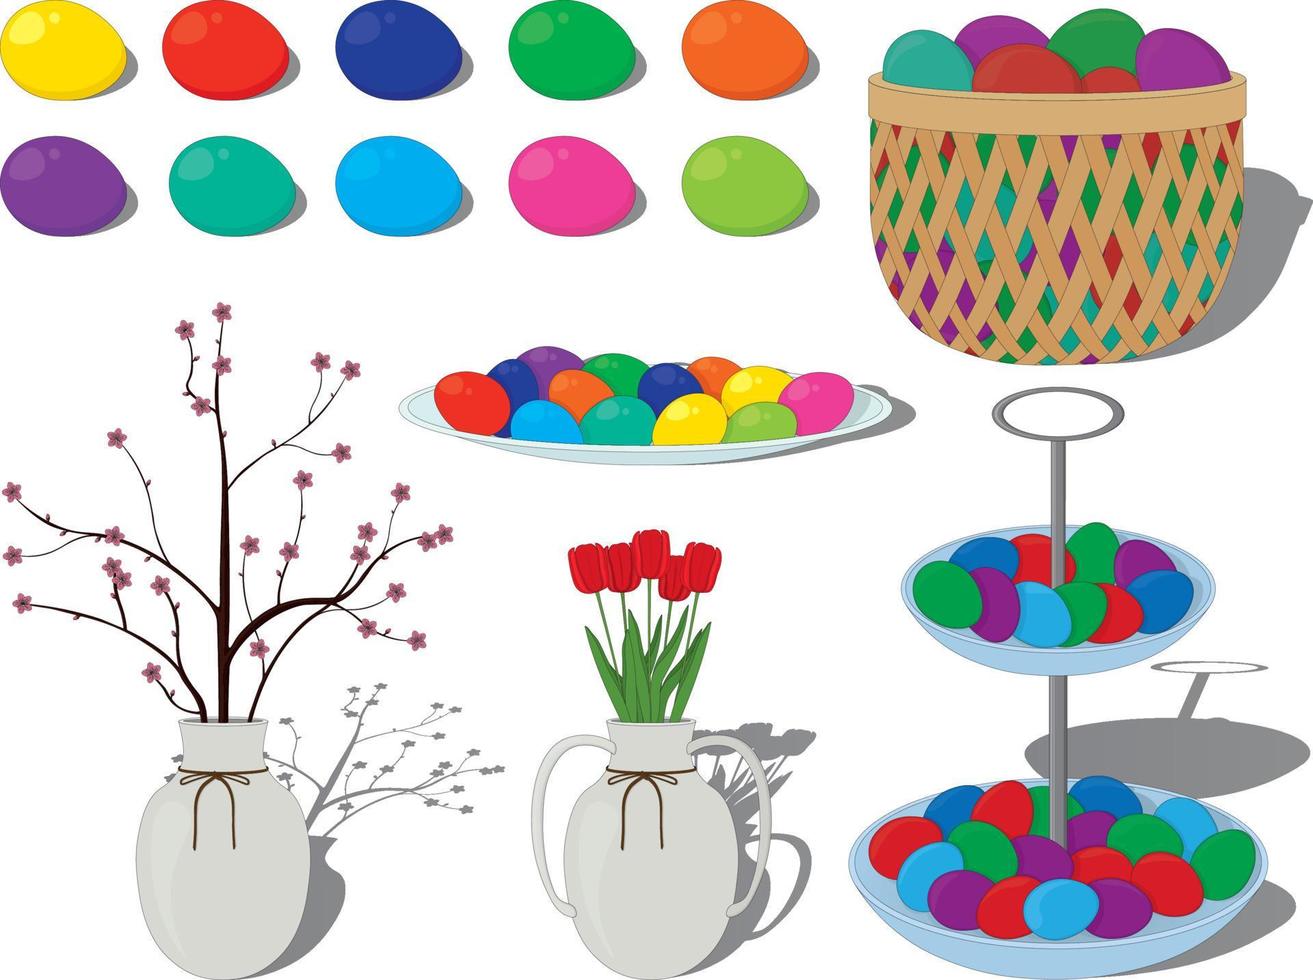 Easter celebration colored eggs and decor collection vector illustration